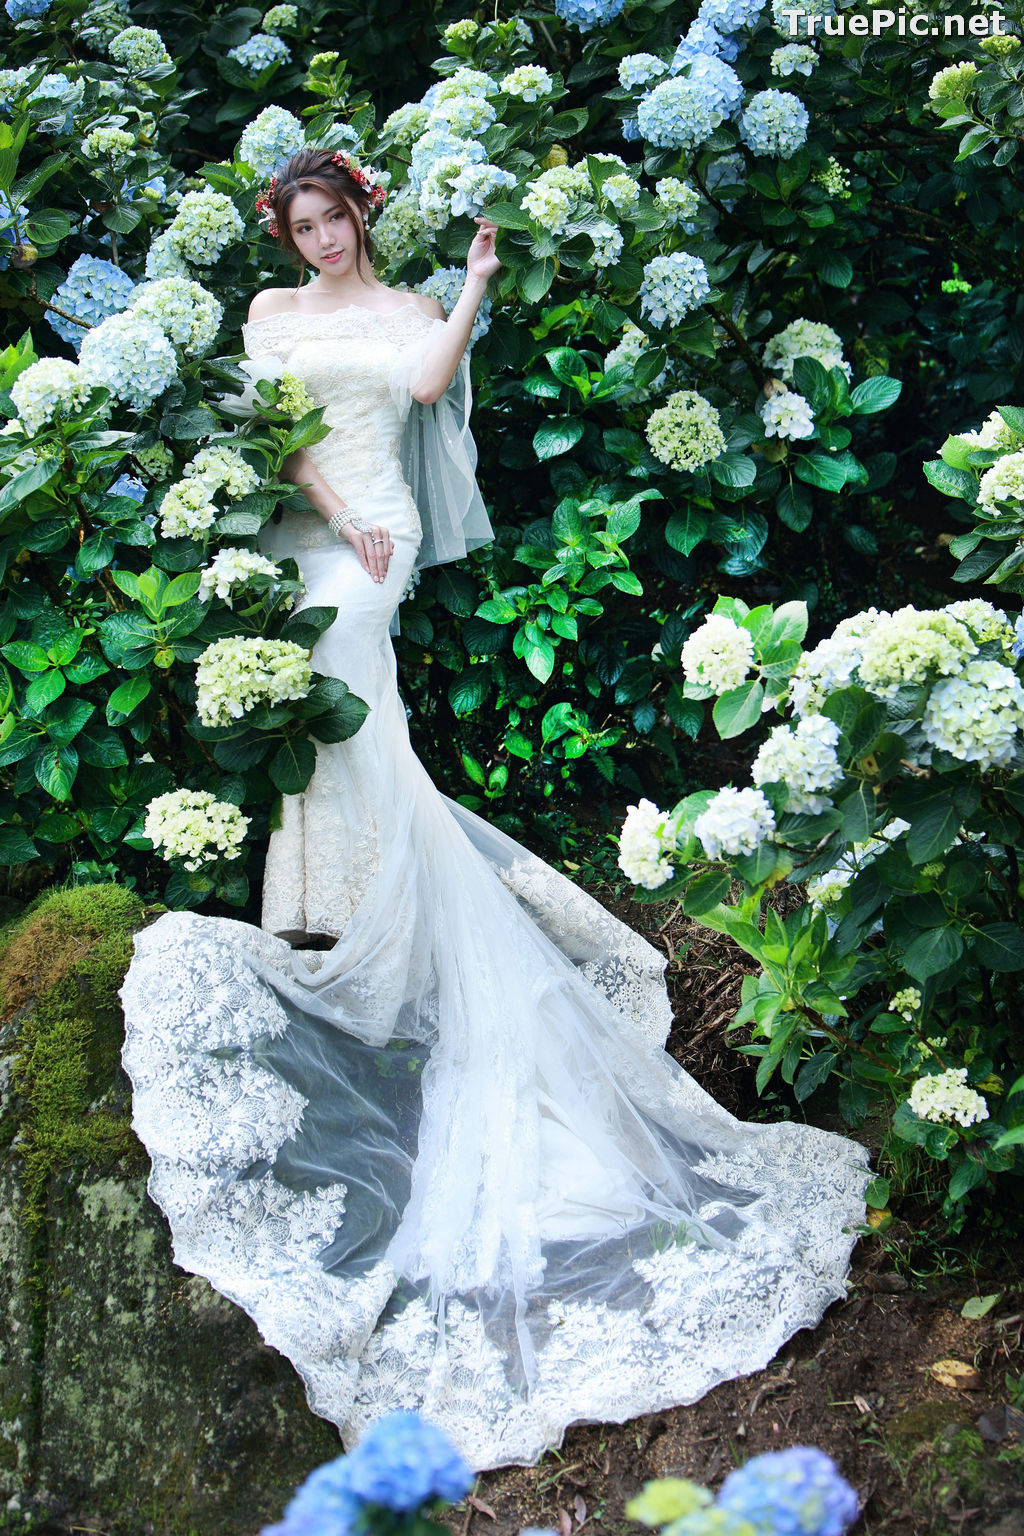 Image Taiwanese Model - 張倫甄 - Beautiful Bride and Hydrangea Flowers - TruePic.net - Picture-59